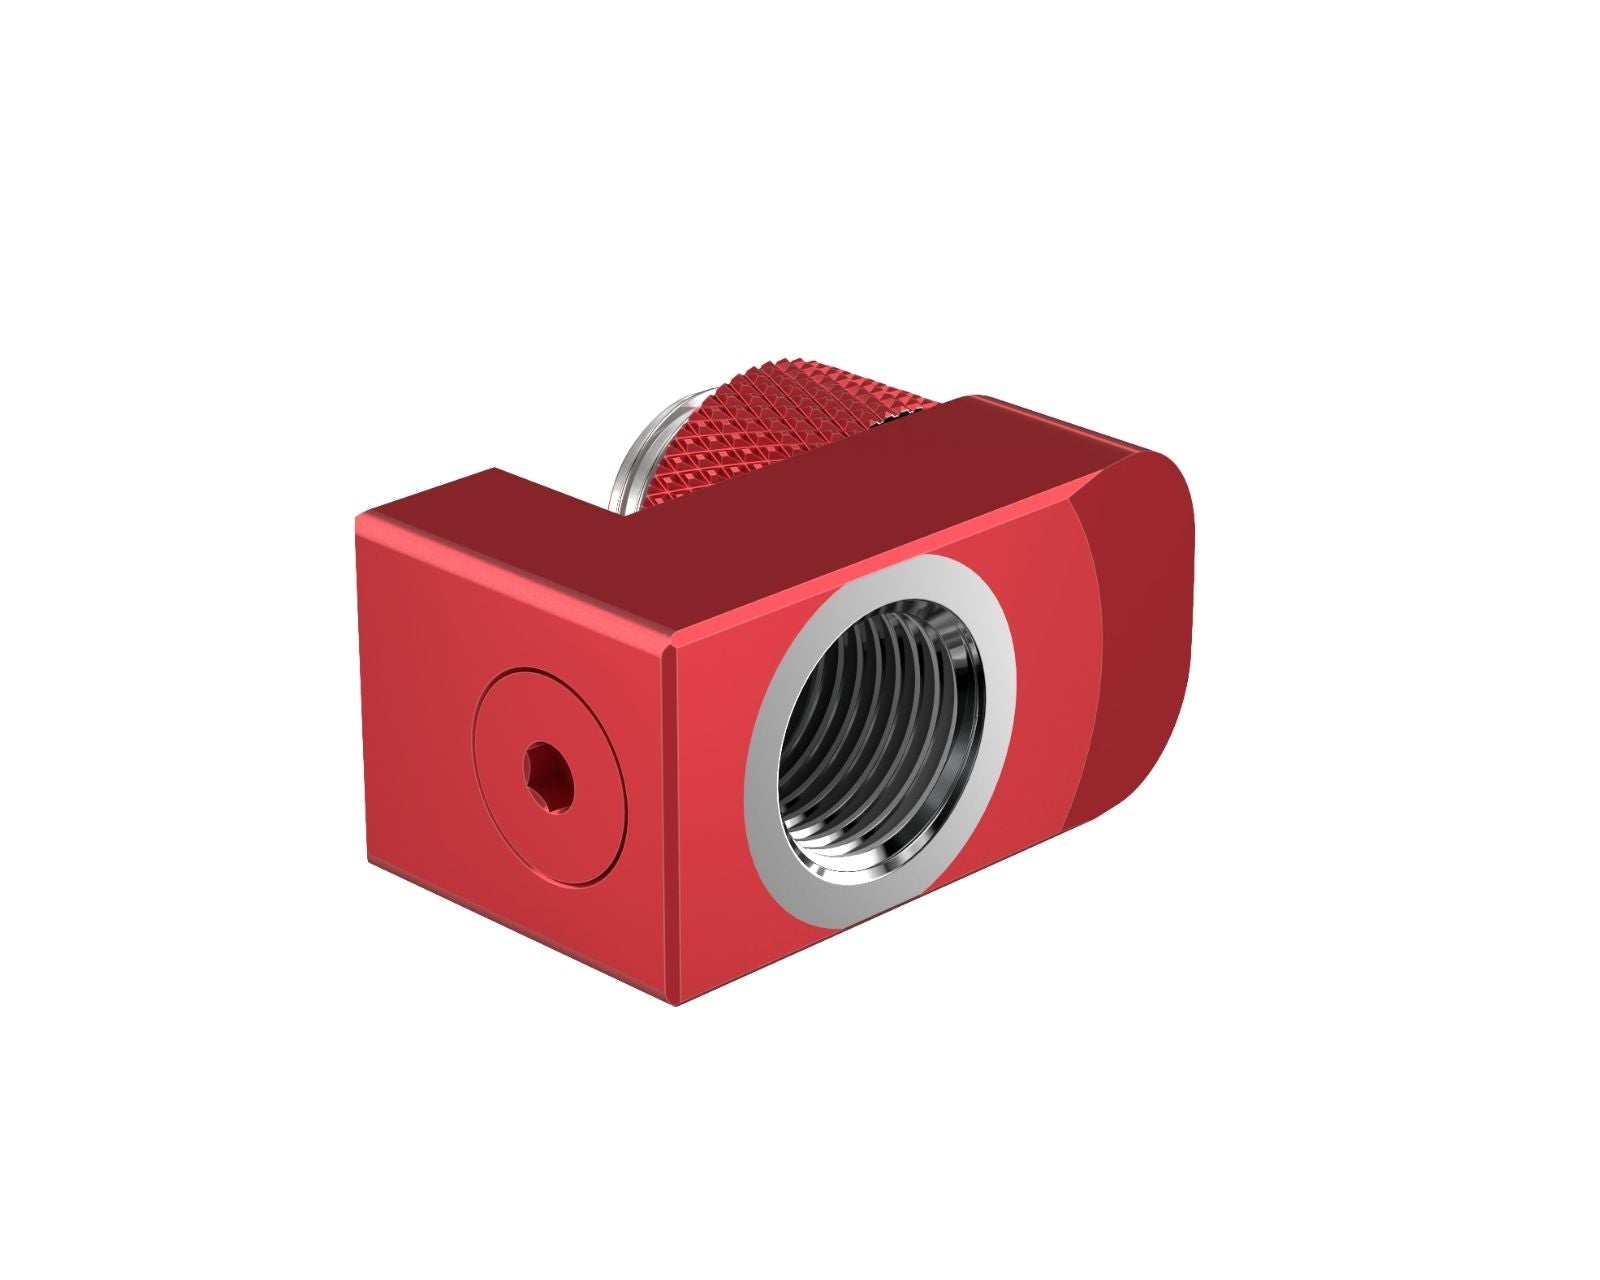 PrimoChill Male to Female G 1/4in. Supported Offset Rotary Fitting - Candy Red